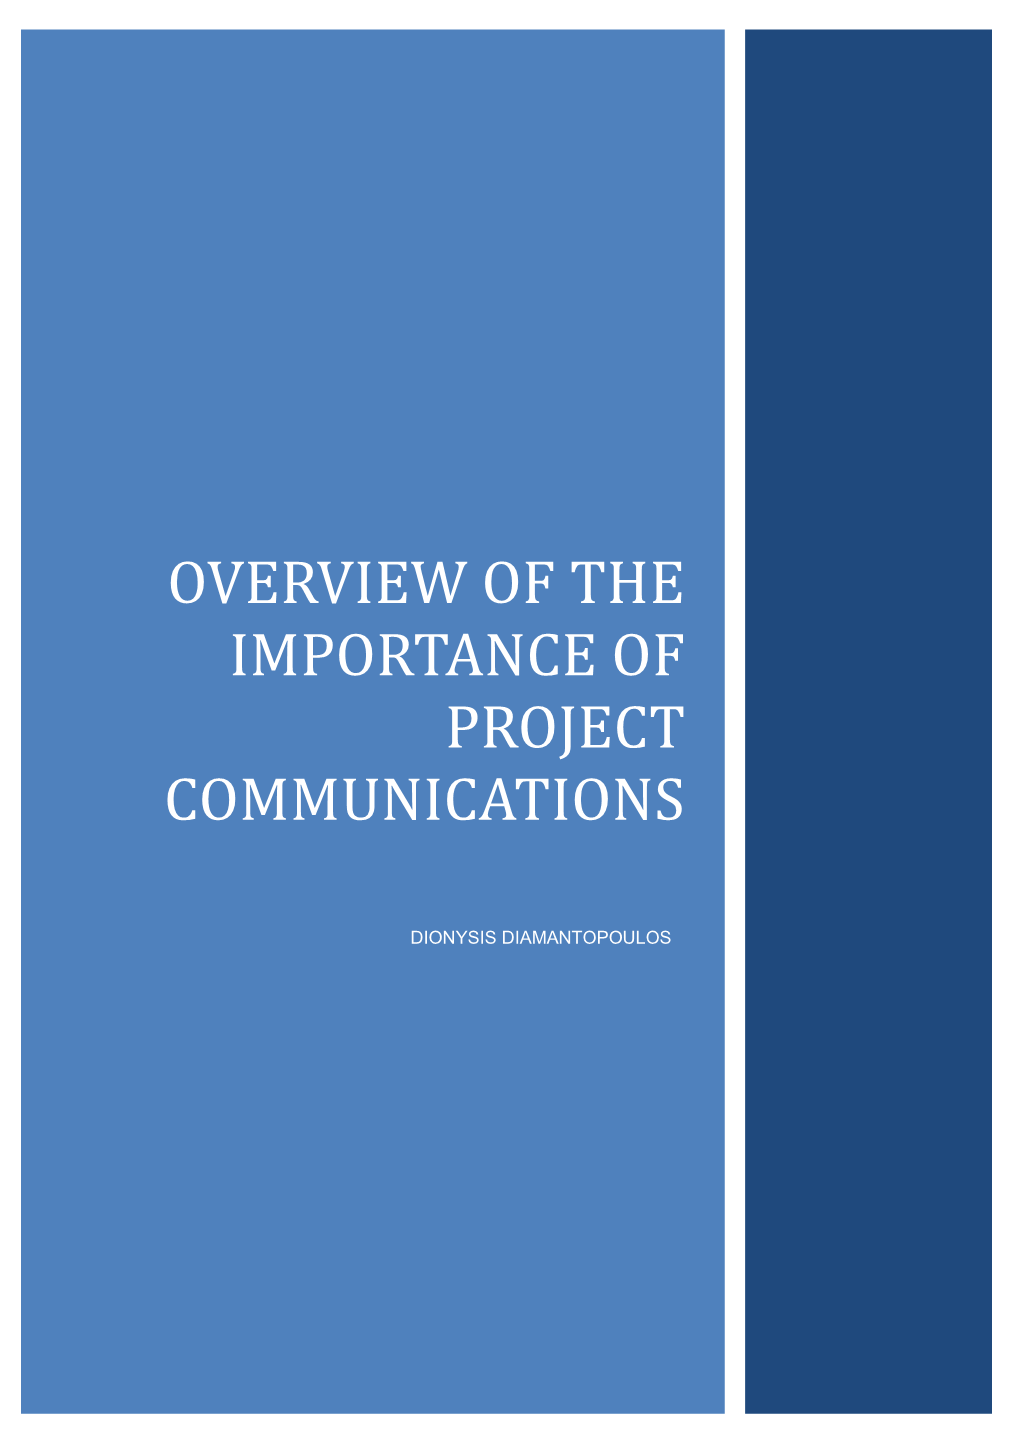 Overview of the Importance of Project Communications